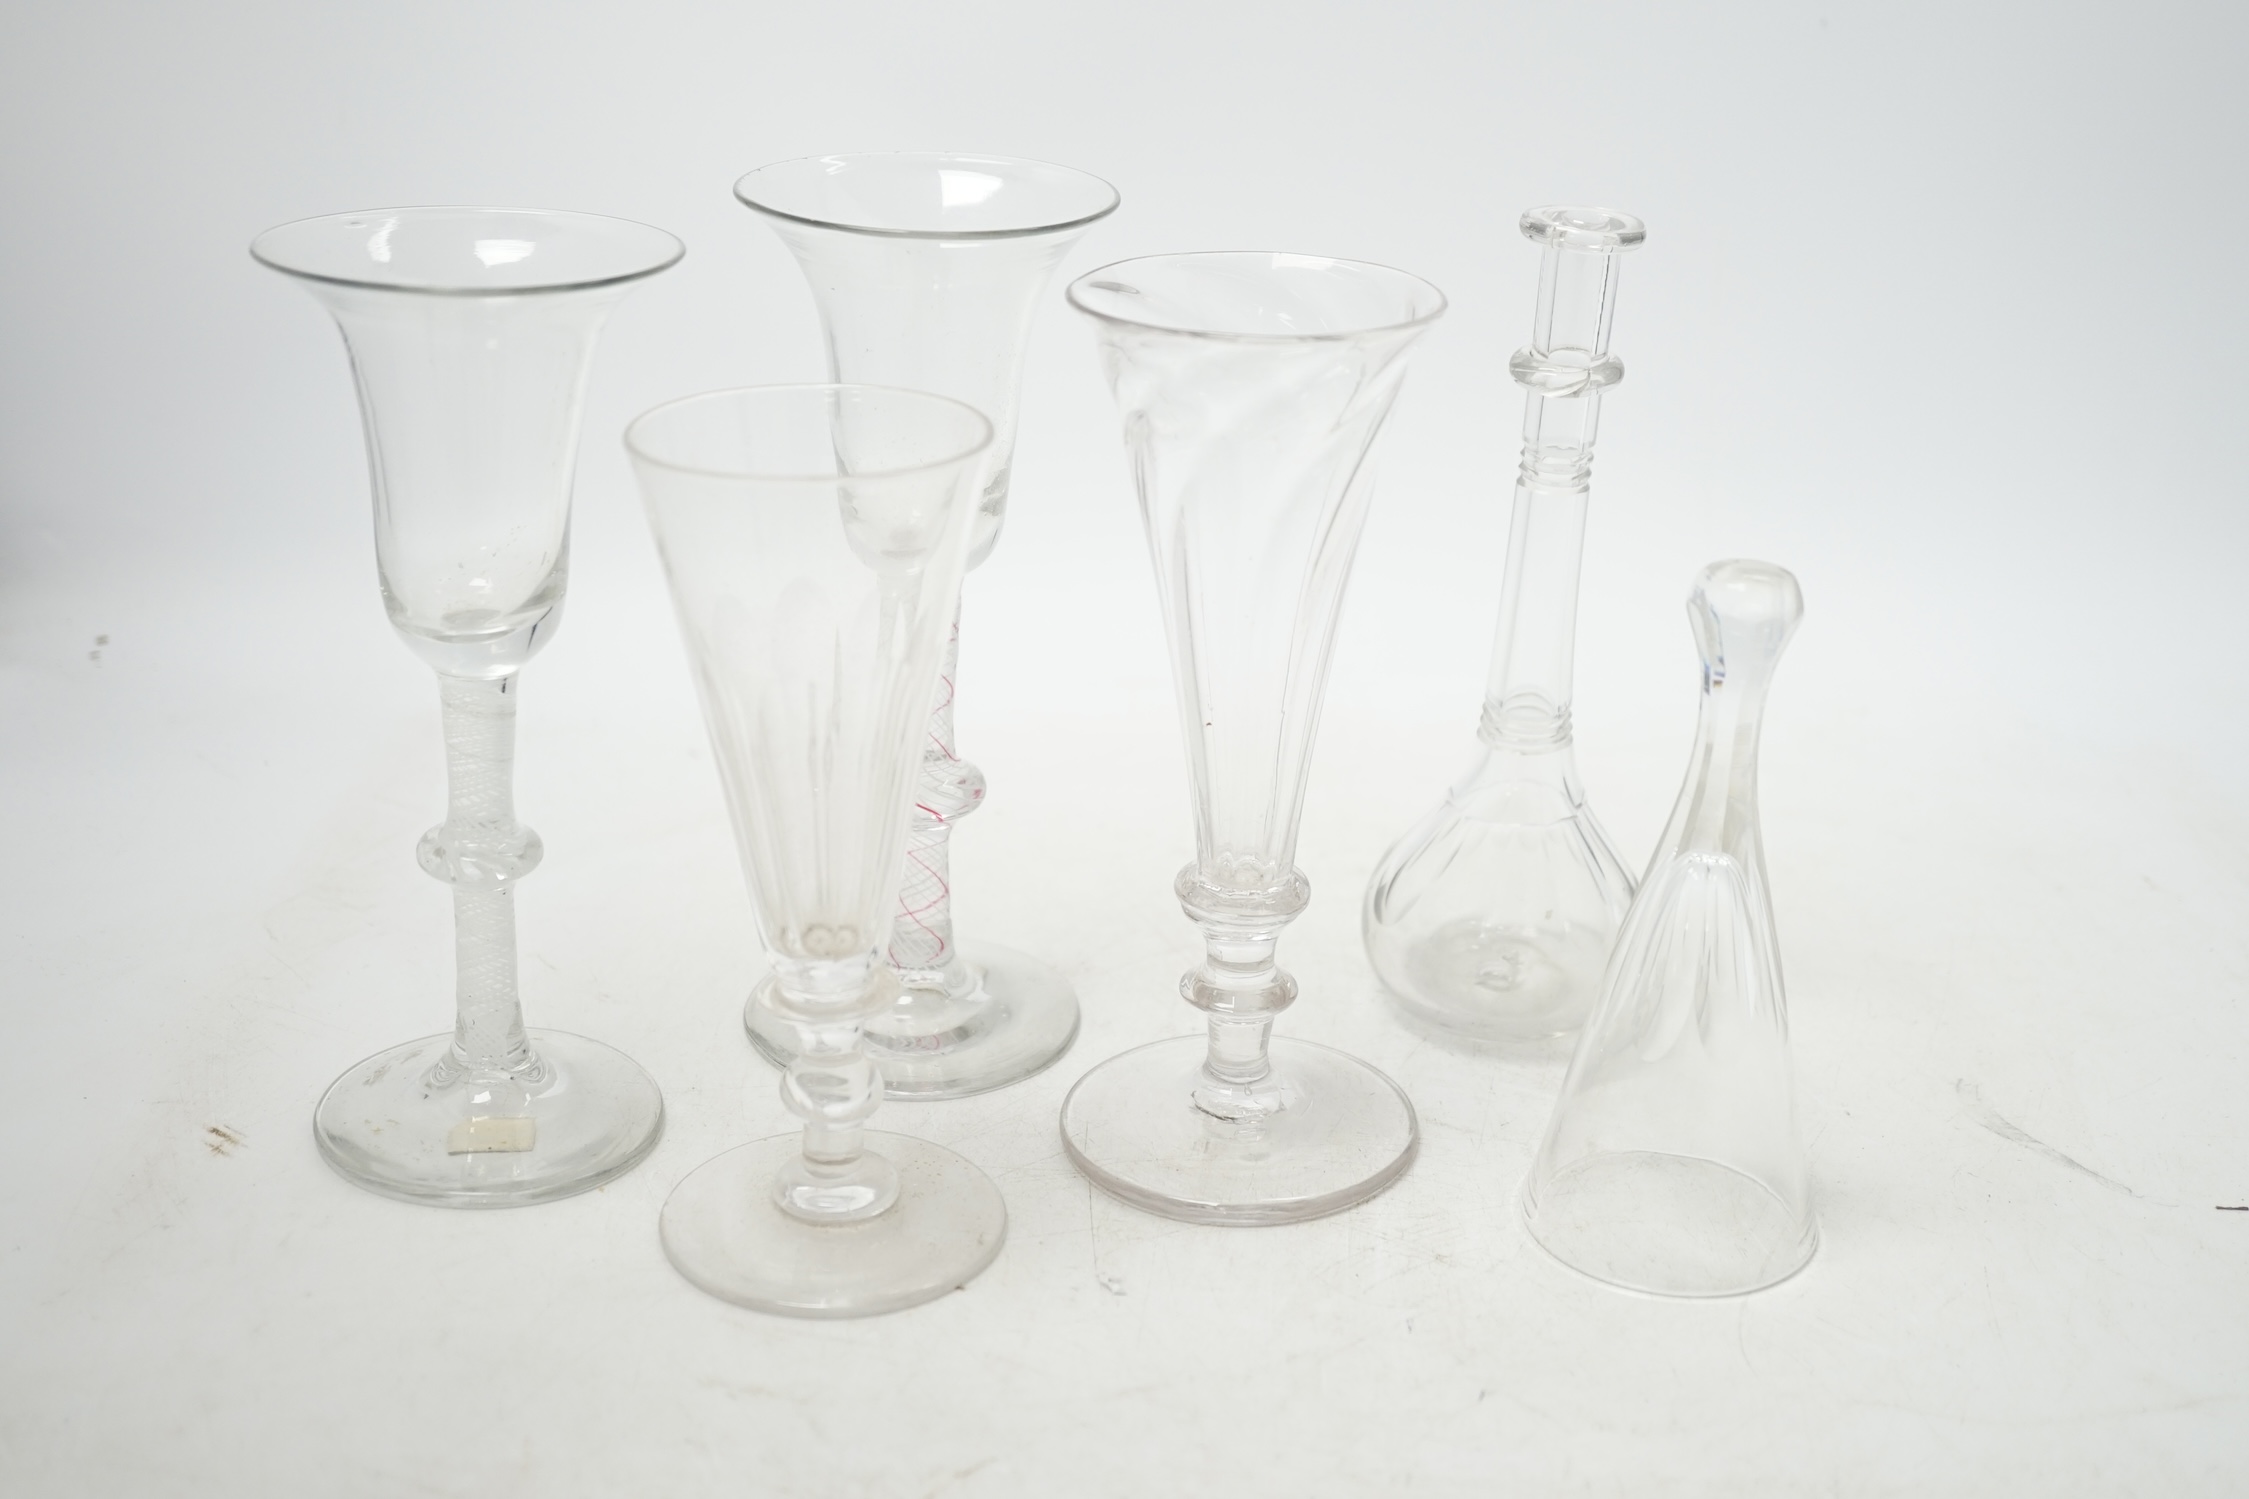 Two 18th century Dutch wine glasses, colour twist and opaque twist stems, two ale glasses, a toddy lifter and a stirrup cup, tallest 16.5cm. Condition - good